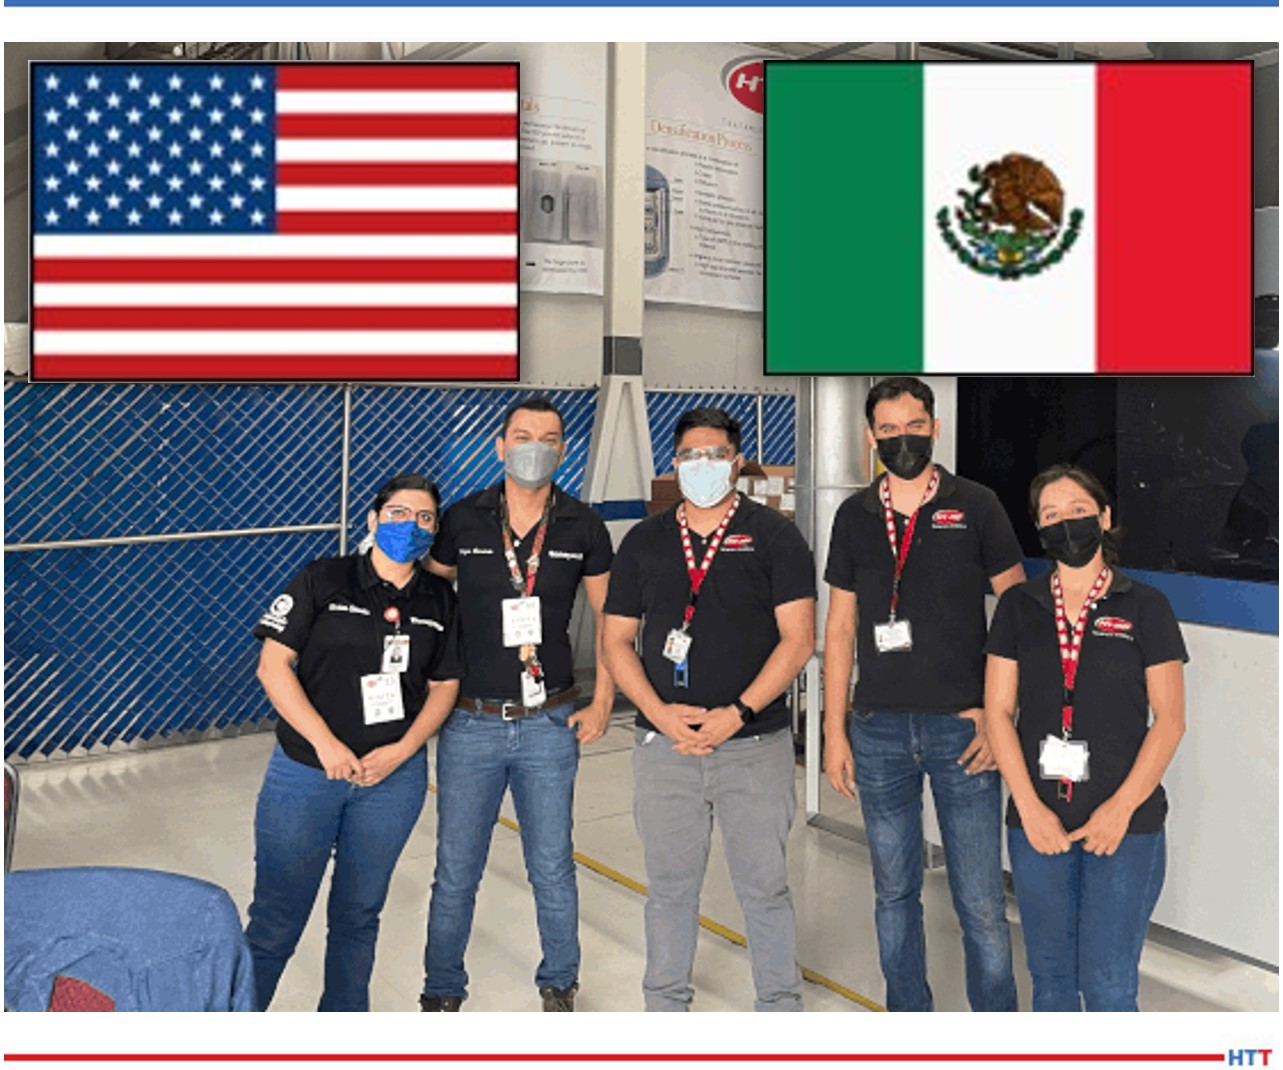 Group of 5 young people in black polos under the flags of US and Mexico